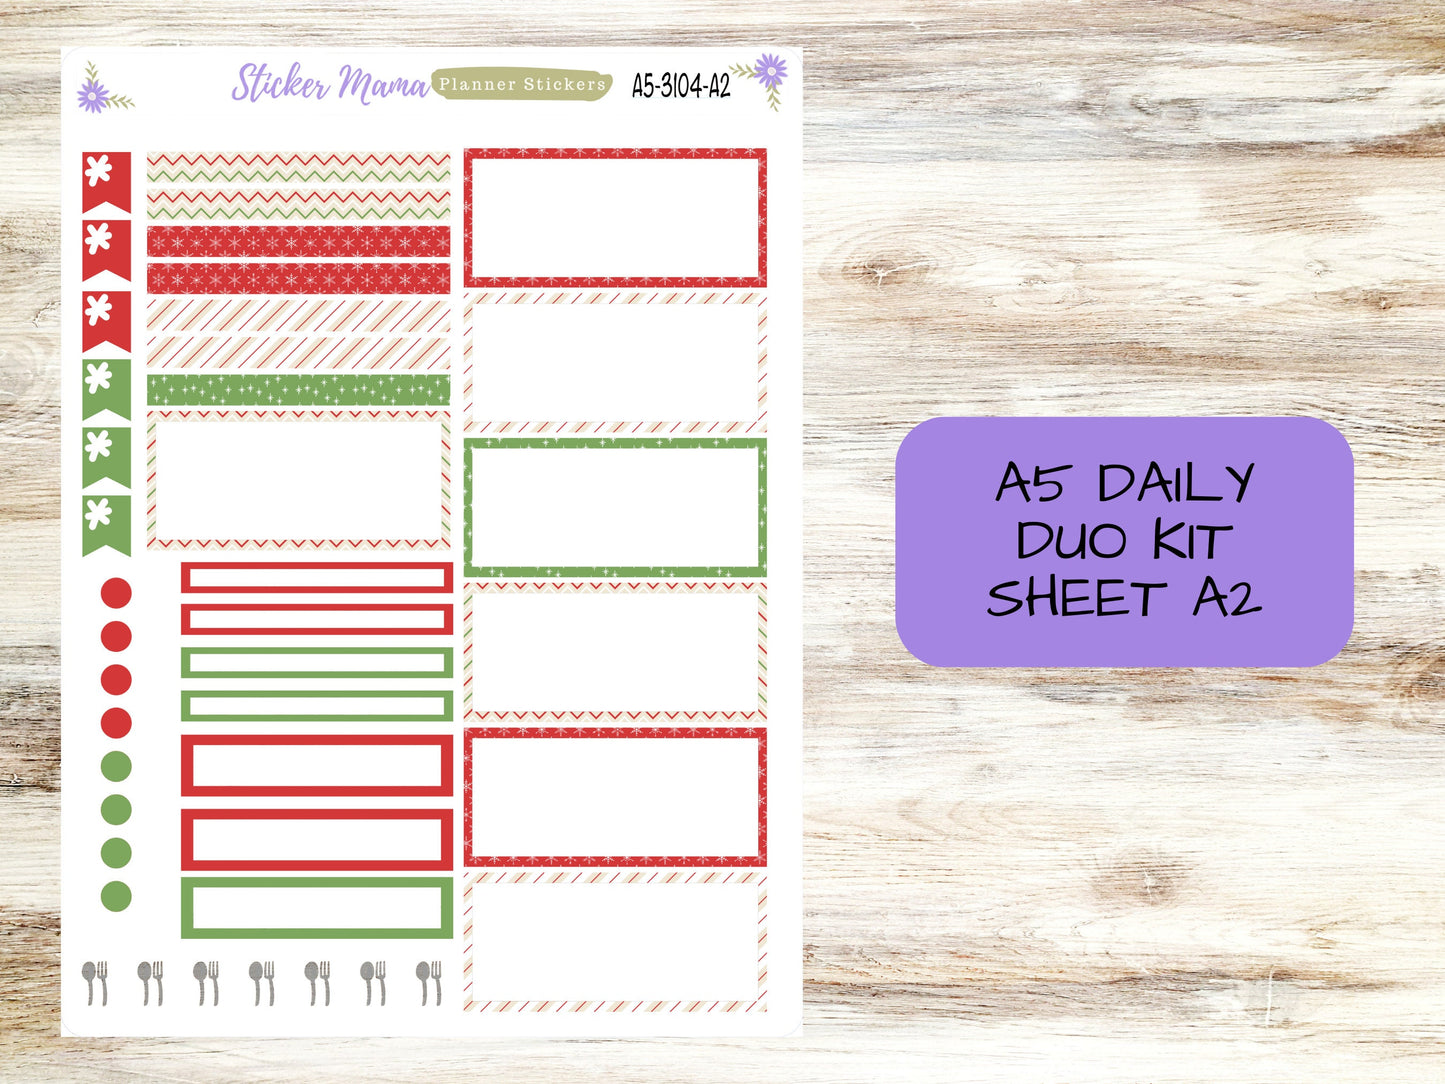 A5-DAILY DUO-Kit #3104 || Santa's Here || Planner Stickers - Daily Duo A5 Planner - Daily Duo Stickers - Daily Planner